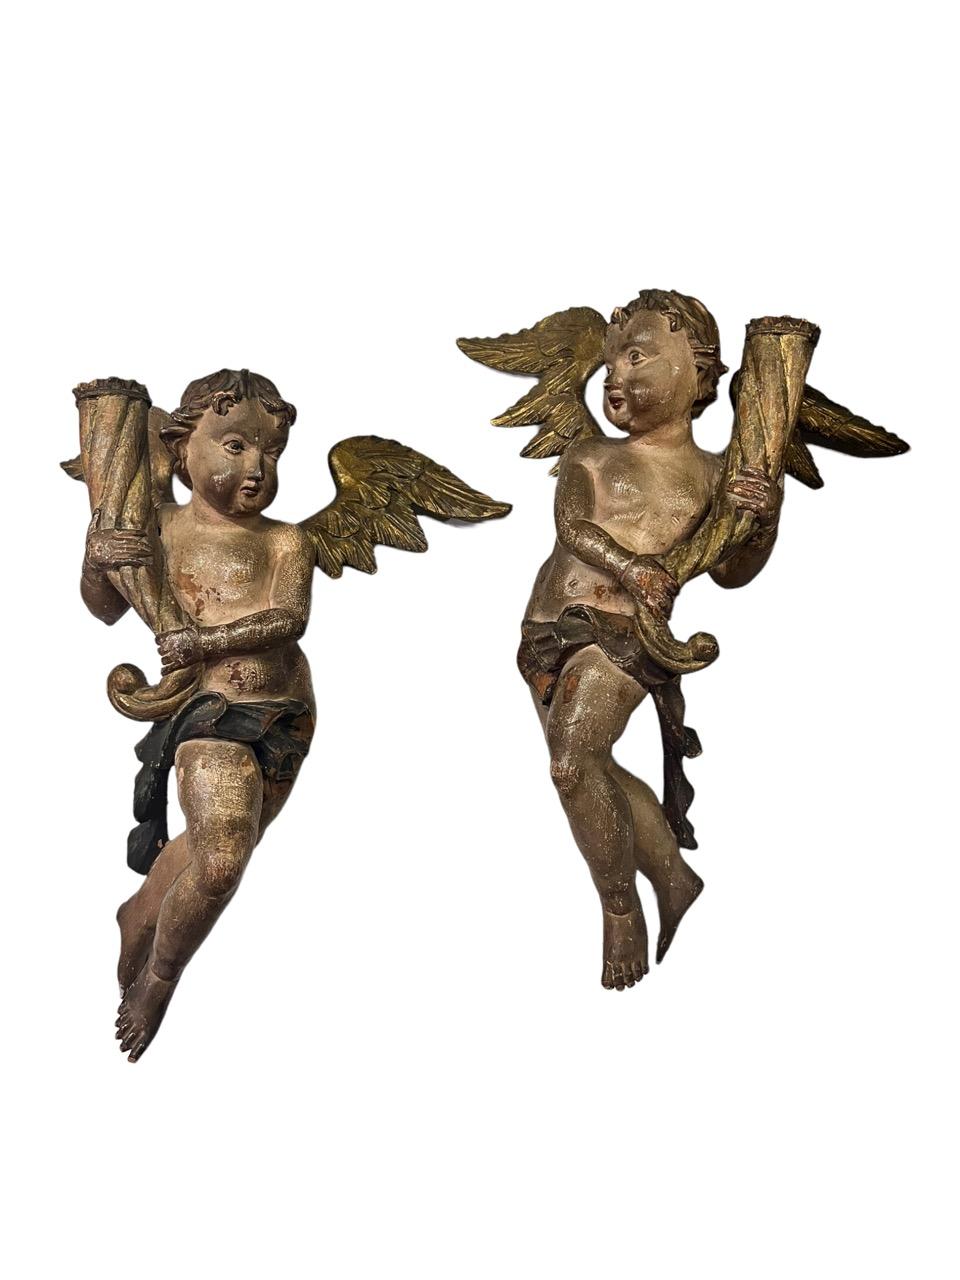 This exquisite pair of 16th-century Italian candlesticks is a testament to the artistry and craftsmanship of the Renaissance era. Meticulously carved from wood and adorned with opulent gold gilding and vibrant polychrome detailing, these